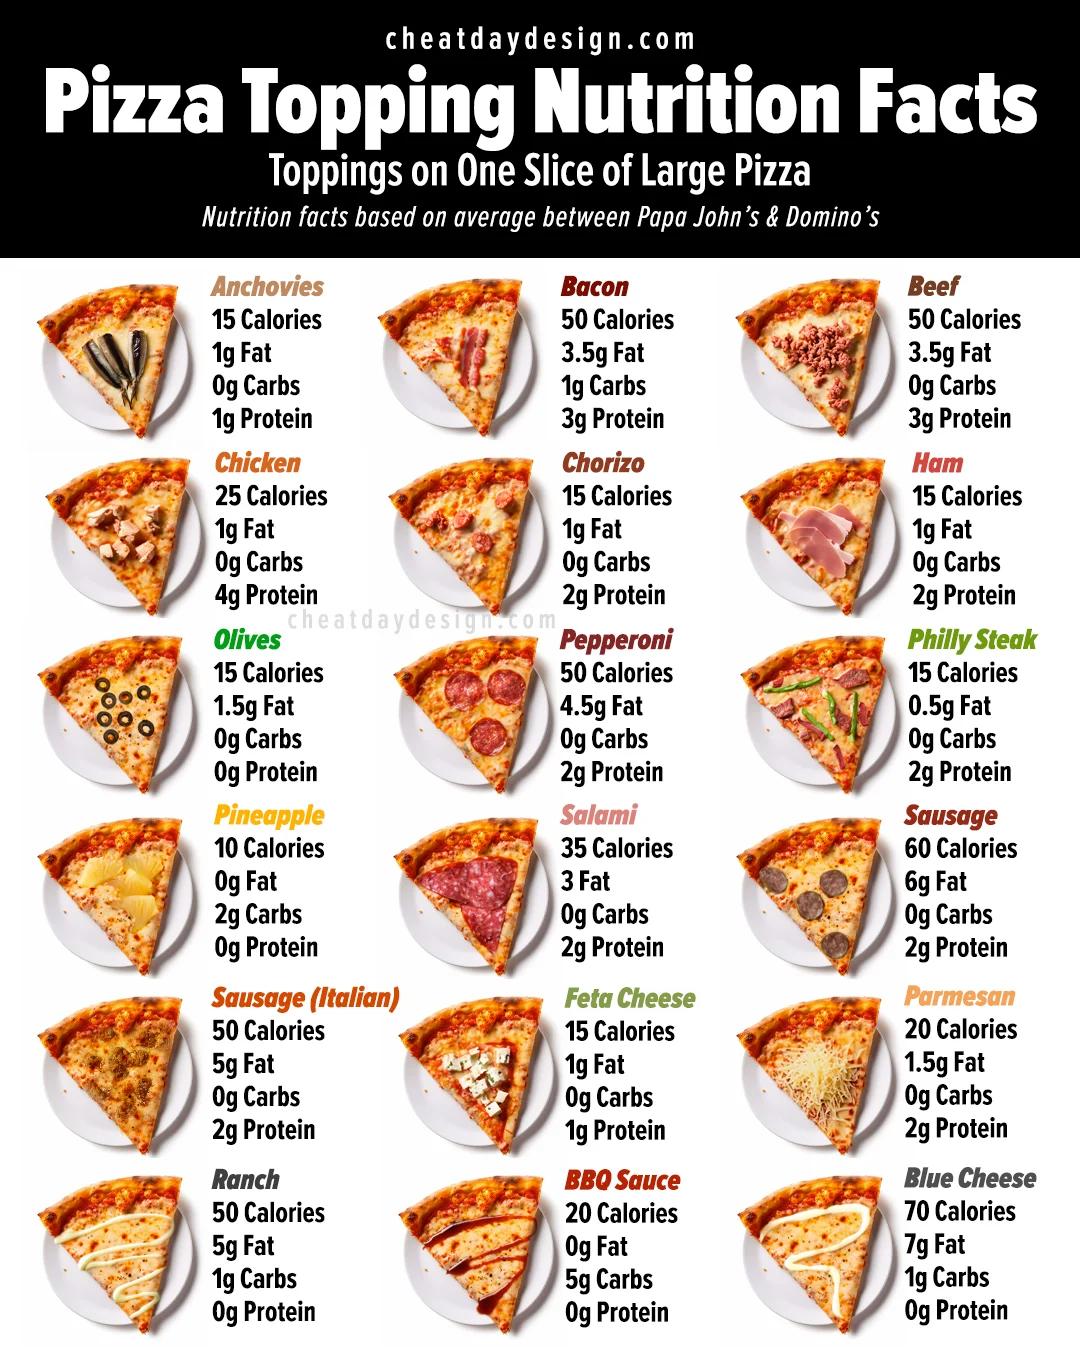 calories in pizza - How many calories are in a whole pizza